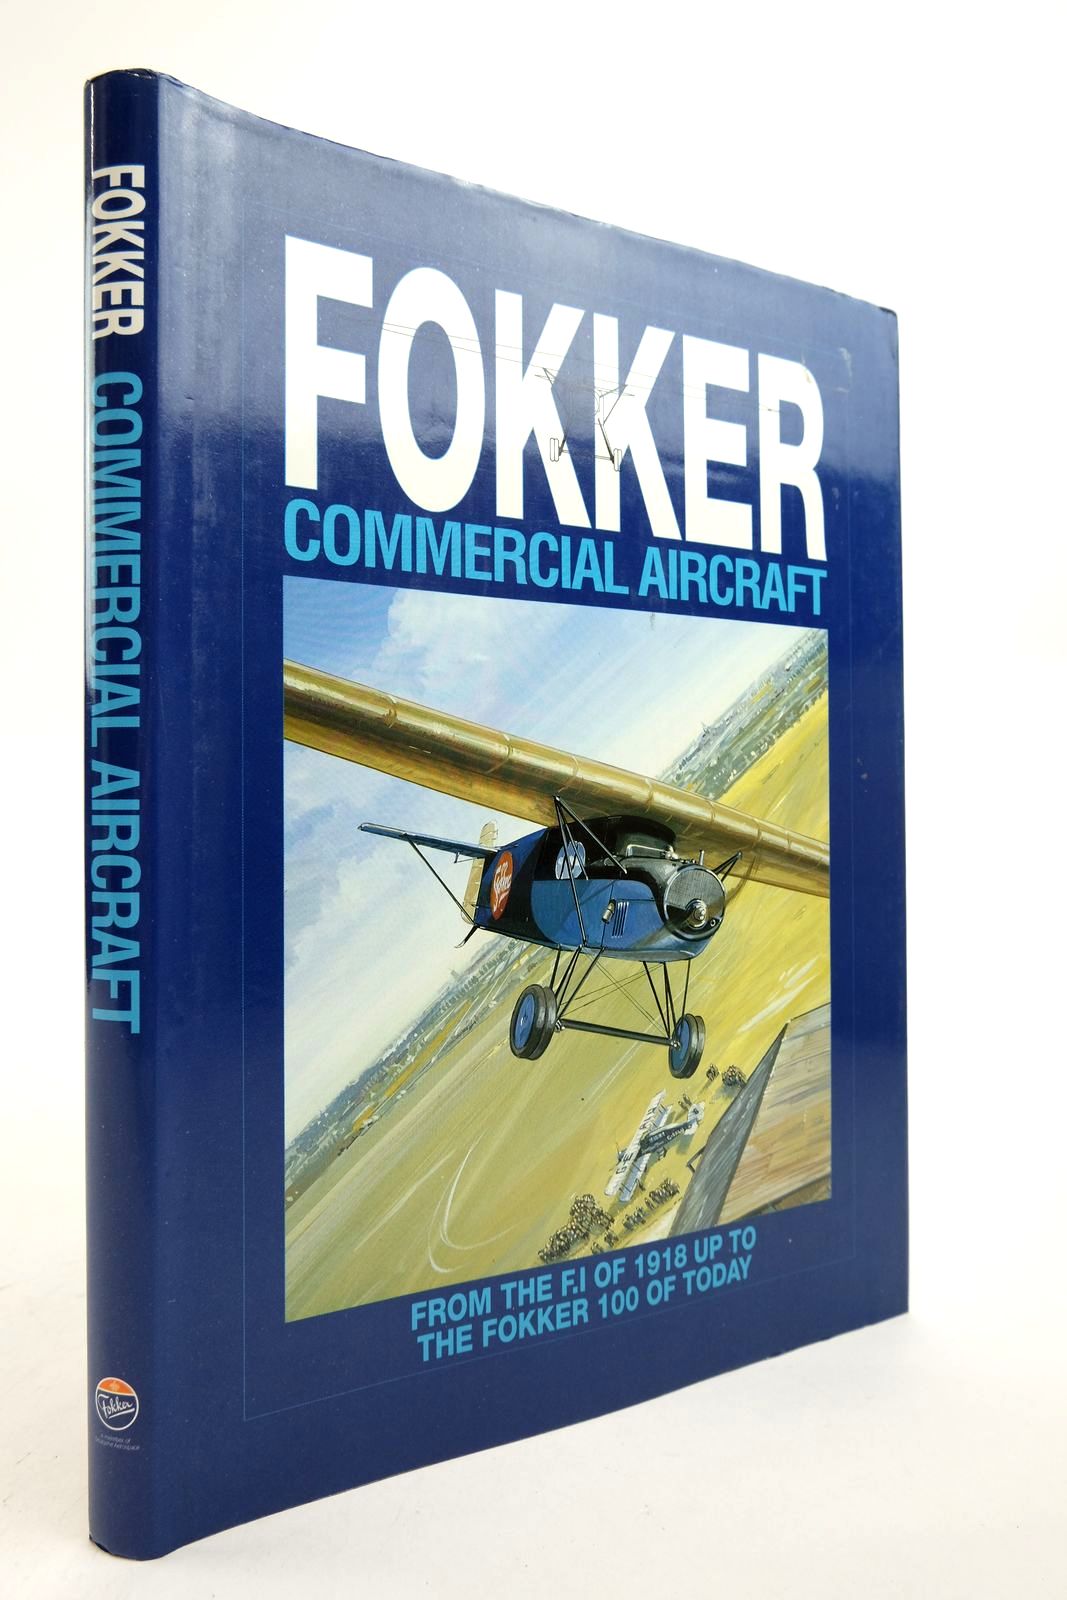 Photo of FOKKER COMMERCIAL AIRCRAFT written by De Leeuw, Rene Fulton, Ken illustrated by Stone, Serge (STOCK CODE: 2139392)  for sale by Stella & Rose's Books